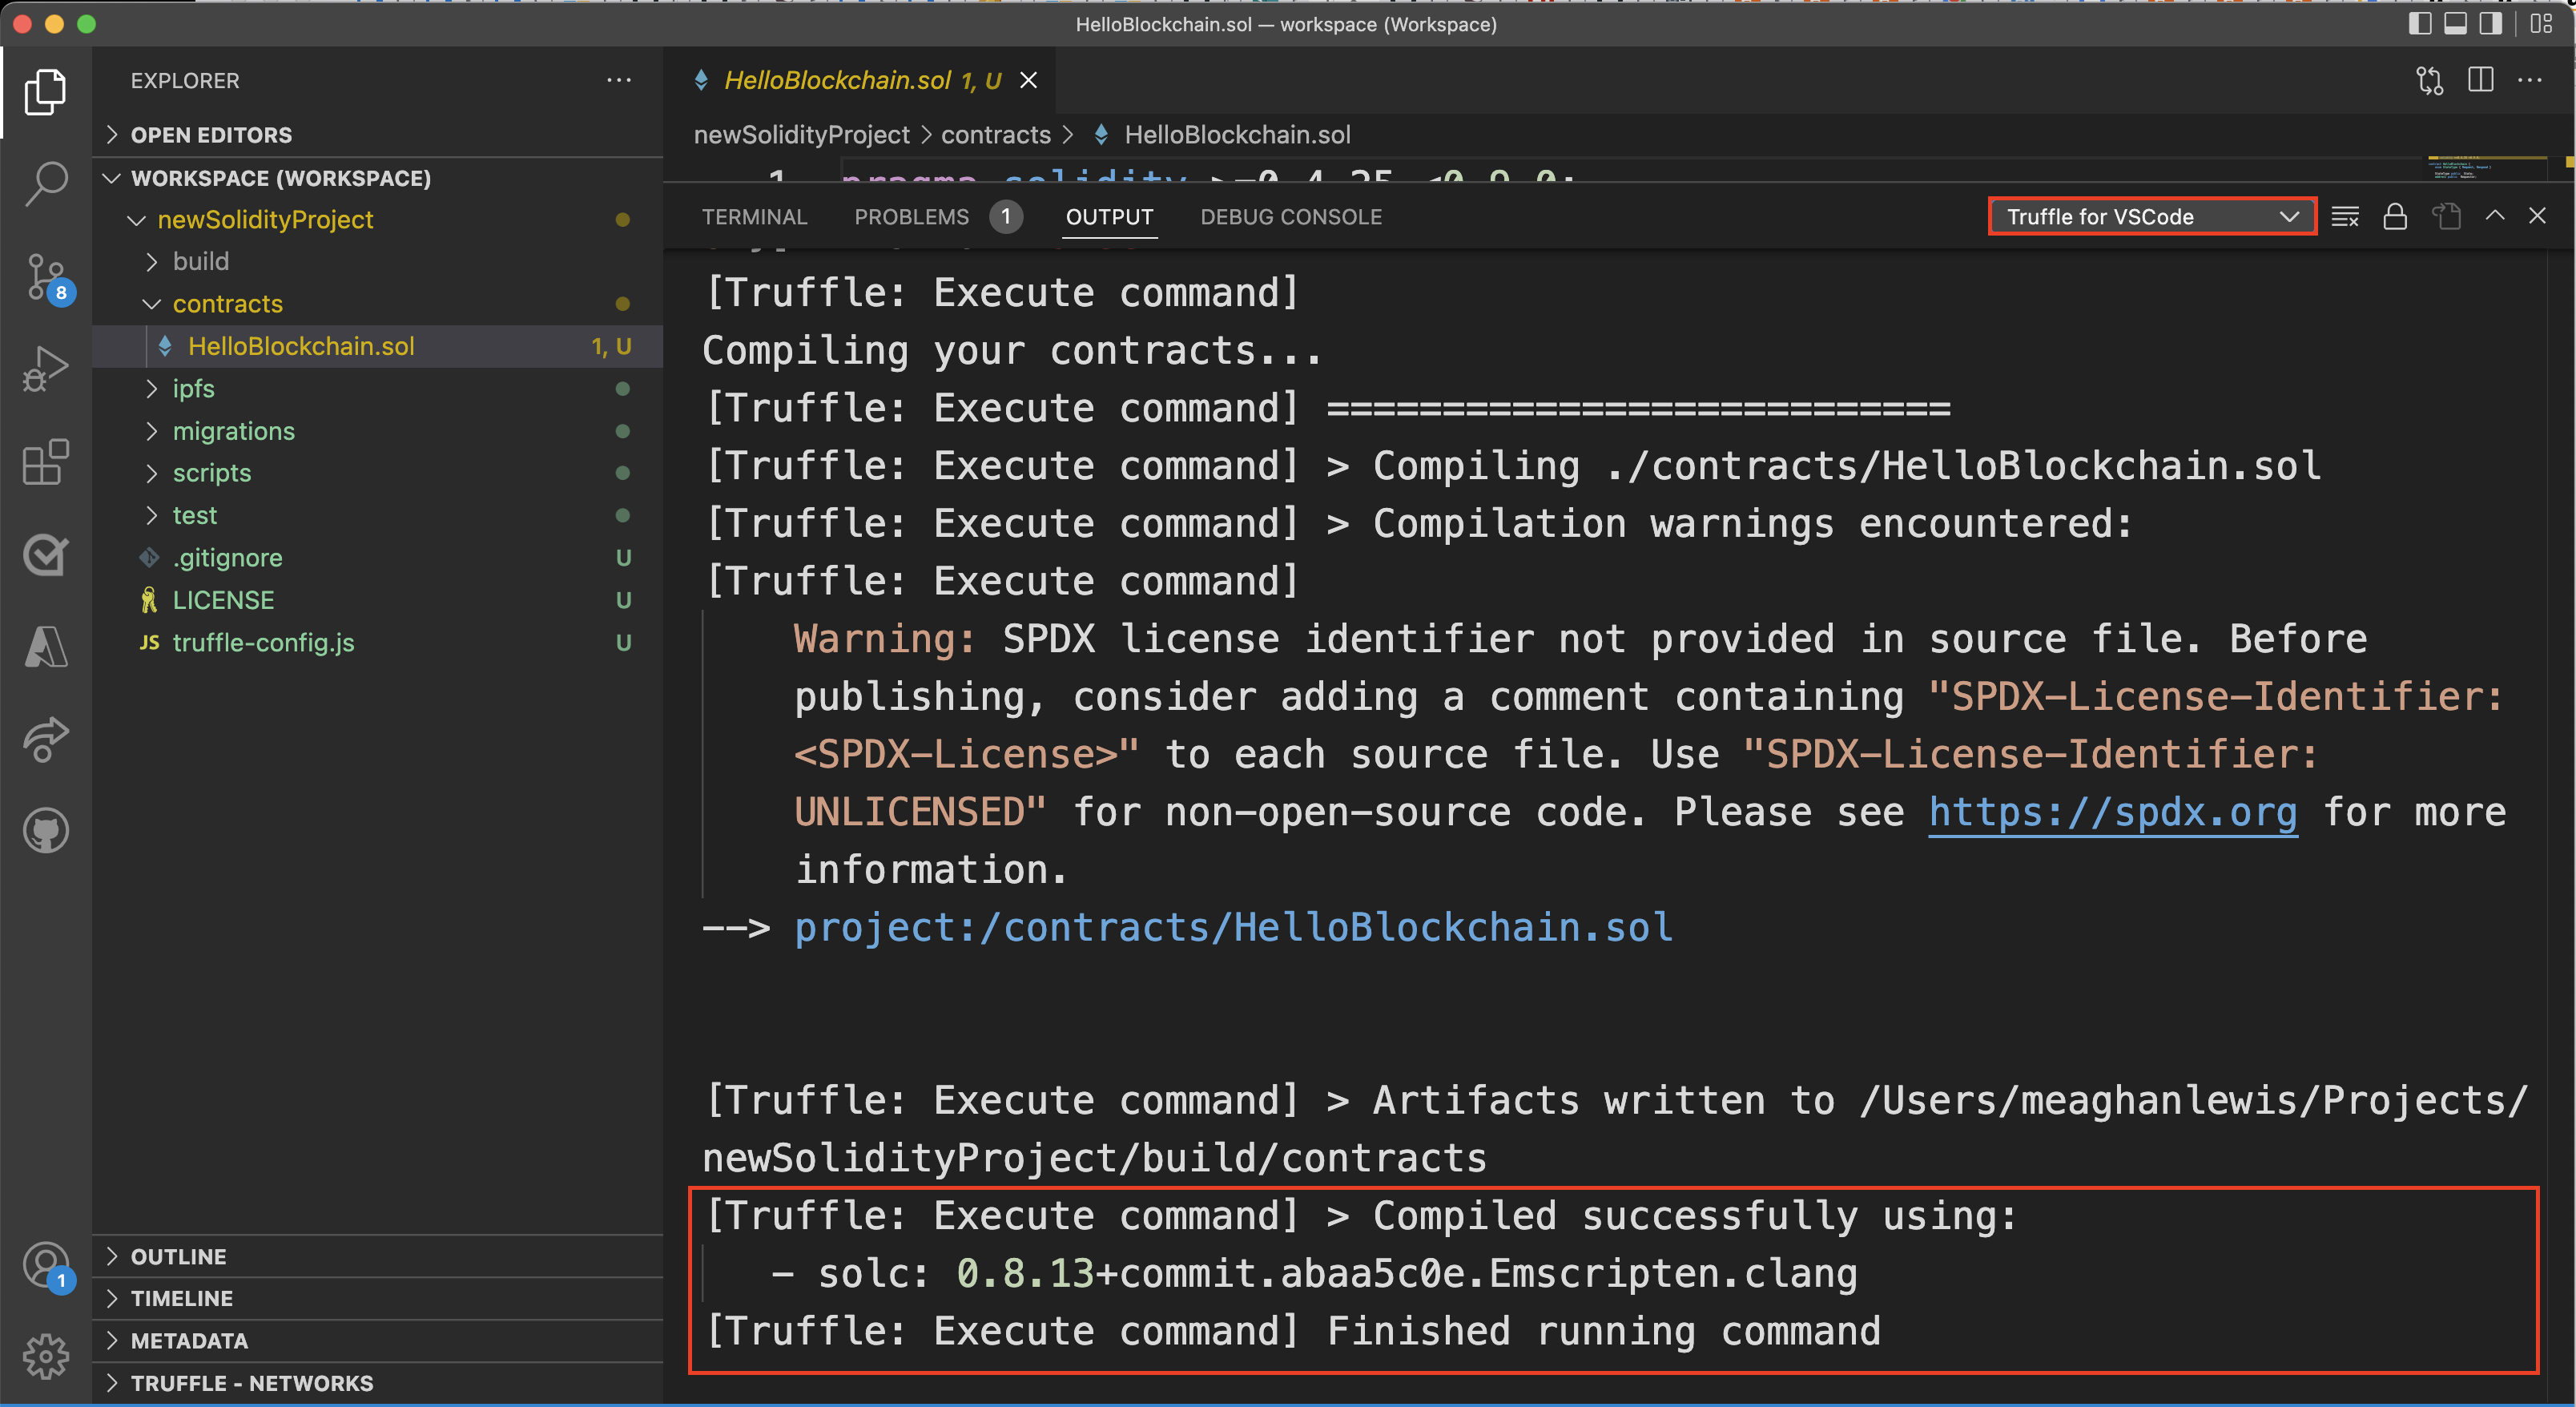 Screenshot showing output information about the compiled contract. The Truffle menu item is selected.